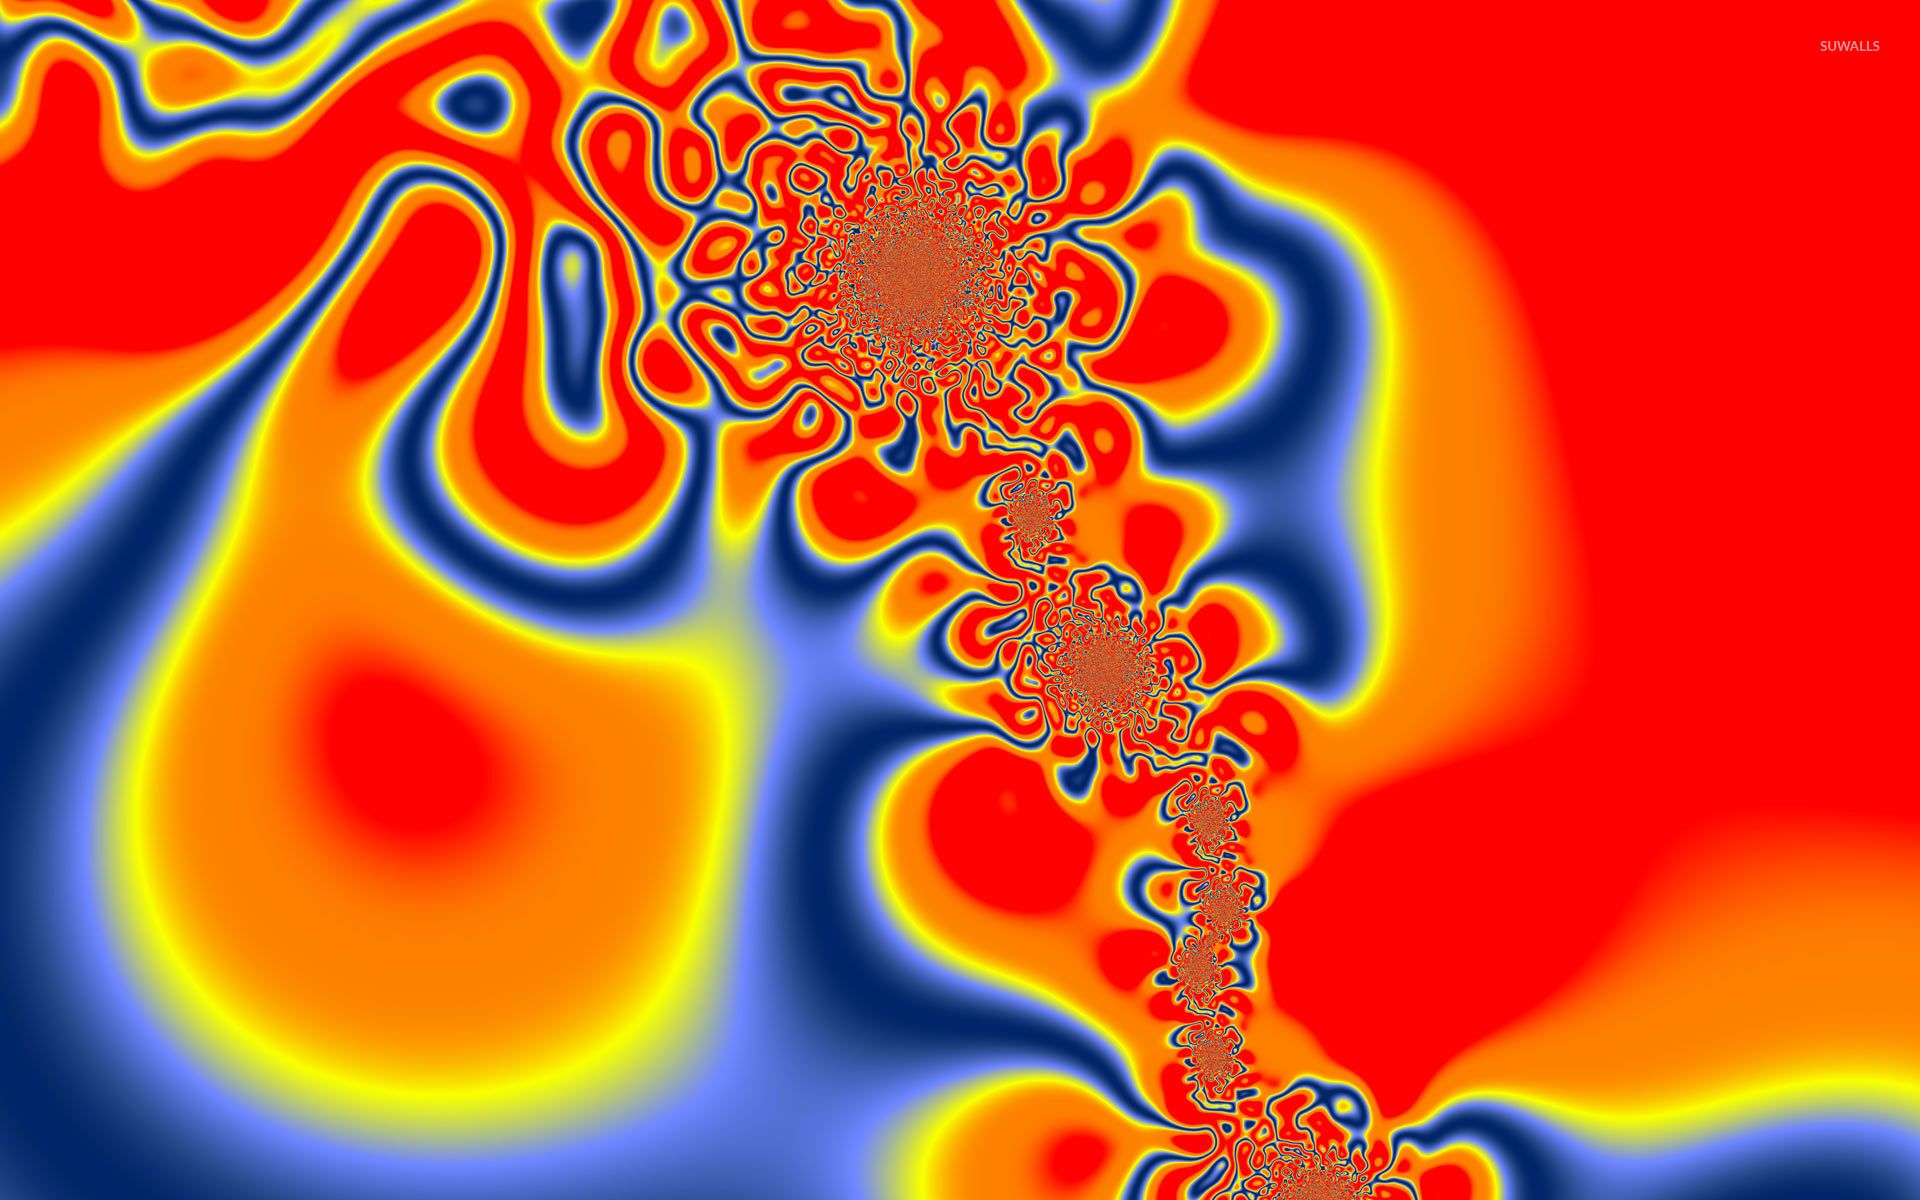 HSL color system  Perlin  Animated Heat Map Made with drawbot   python python3 coding codingraphic perlin automation imageprocessing  automatically